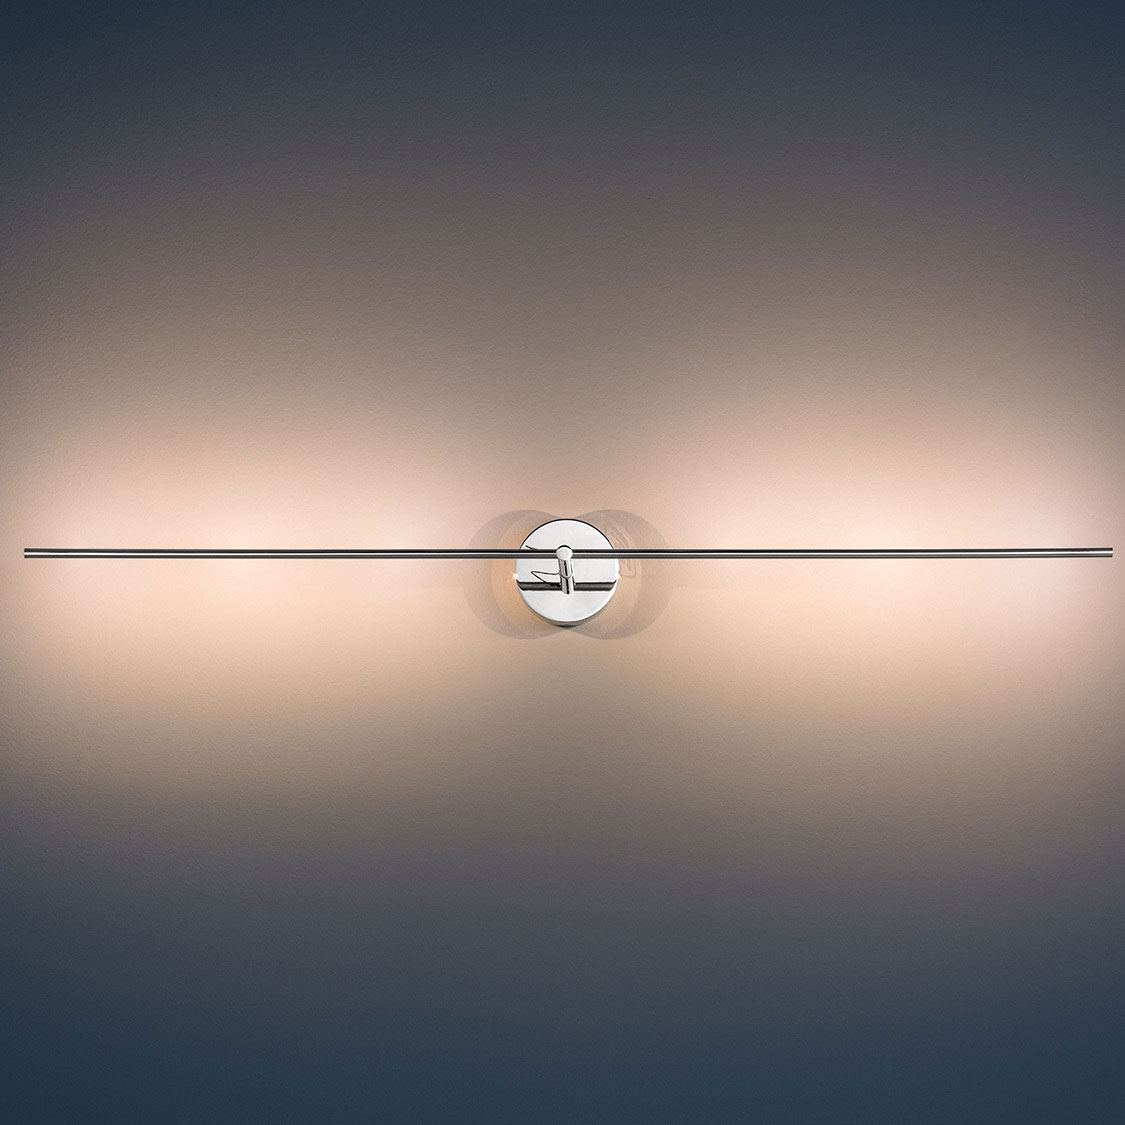 LIGHT STICK T LED metal table lamp By Catellani & Smith